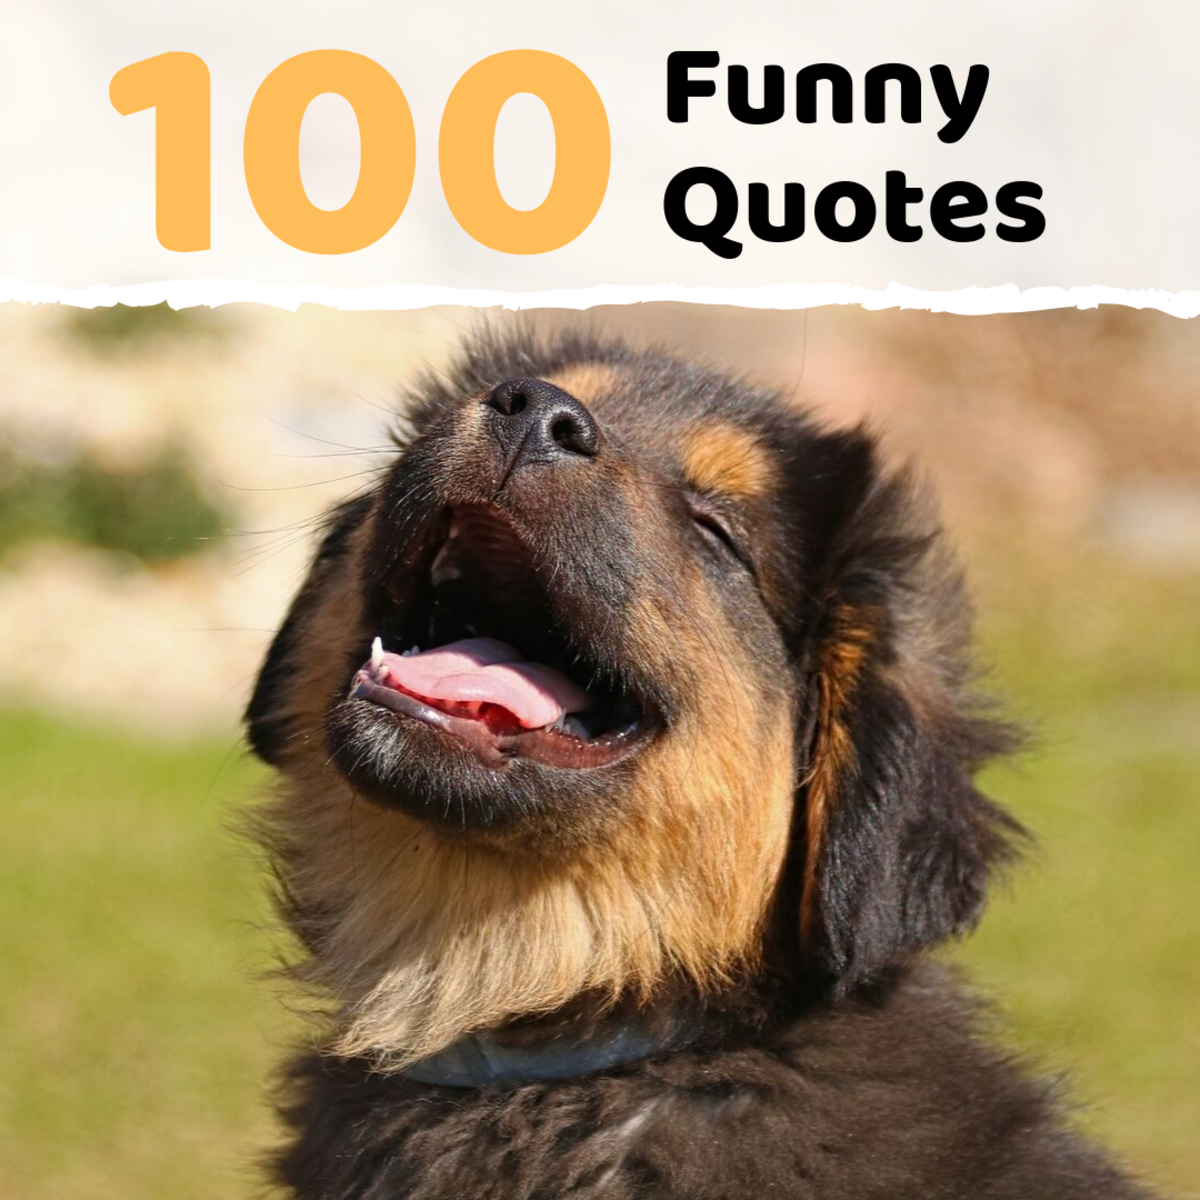 Enjoy a hearty laugh over these funny quotes and sayings!